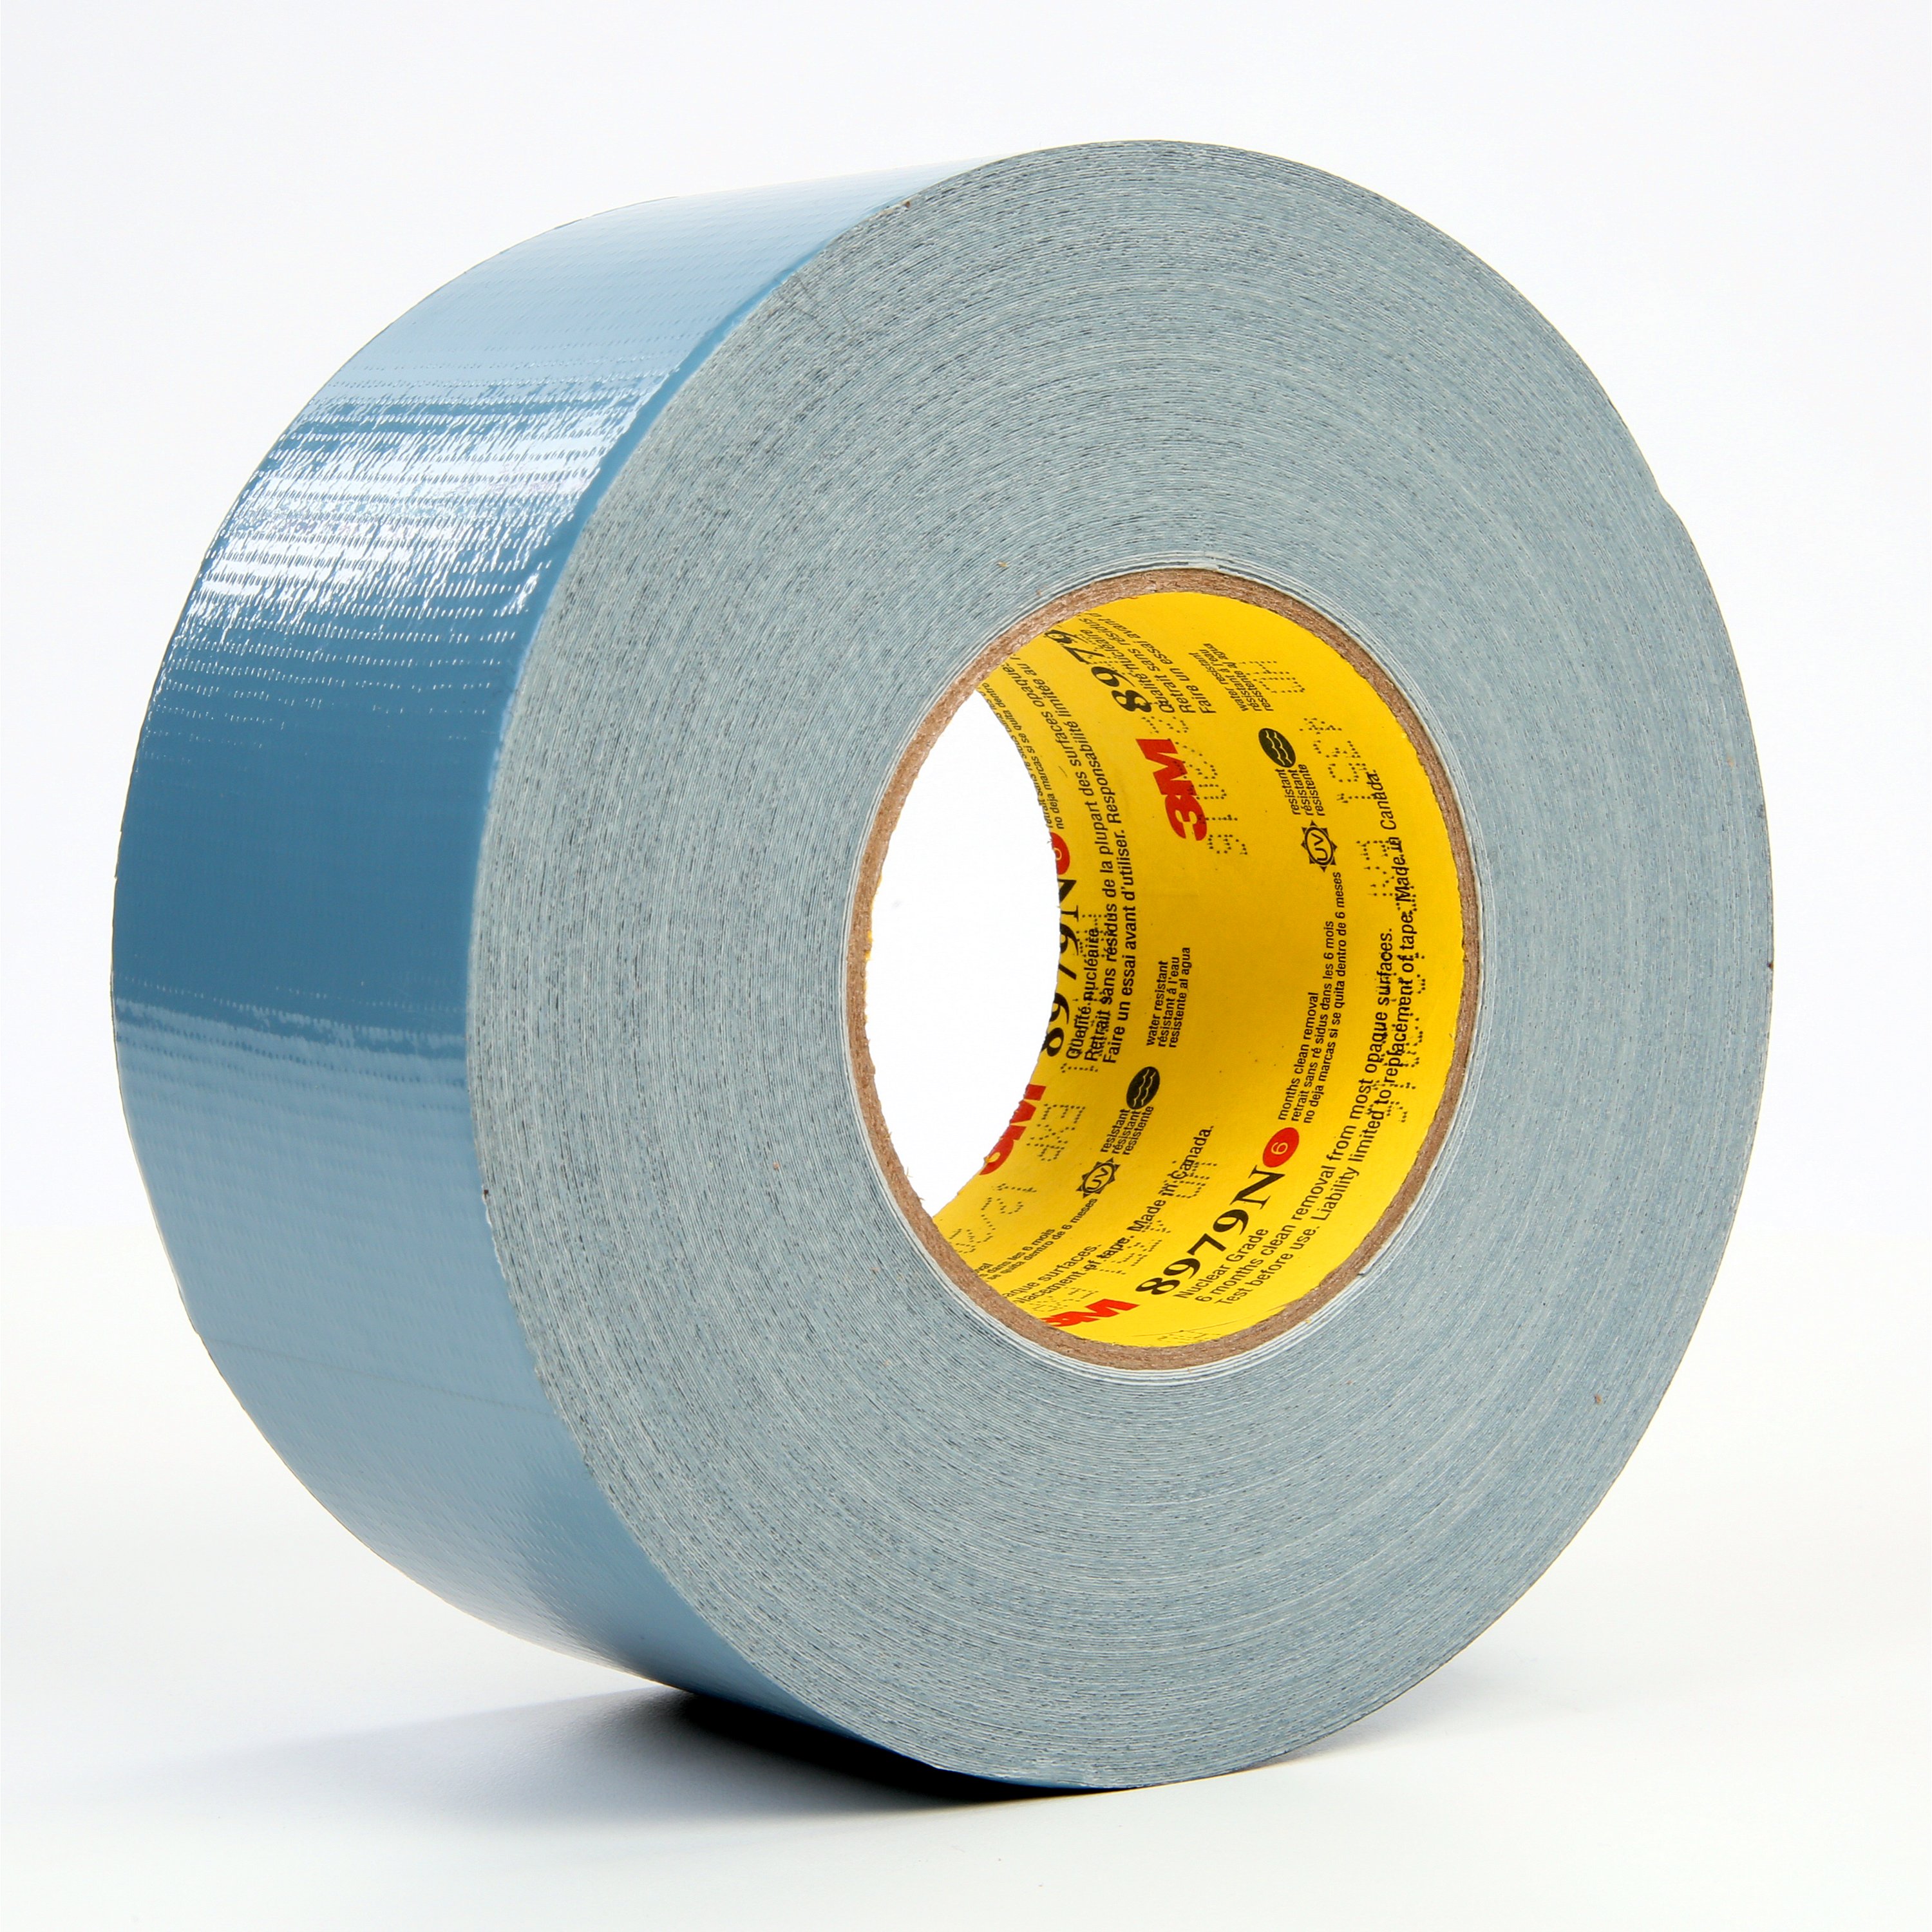 Constructed of polyethylene film laminated to cloth with a rubber adhesive, this tape resists curling and tears off the roll cleanly for easy application on rough surfaces.